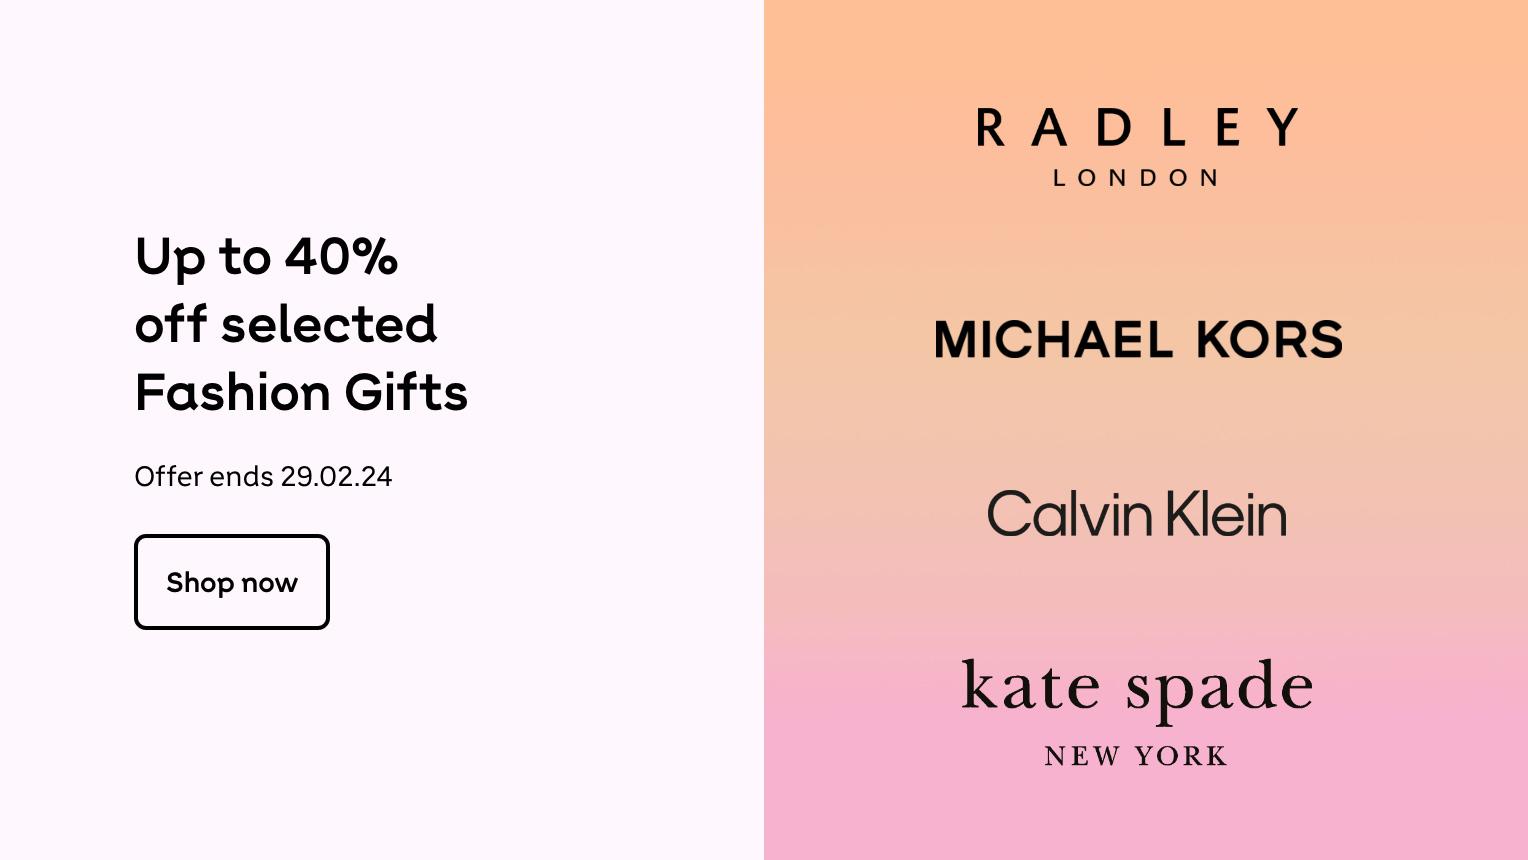 Up to 40%
off selected
Fashion Gifts
Offer ends 29.02.24
Shop now